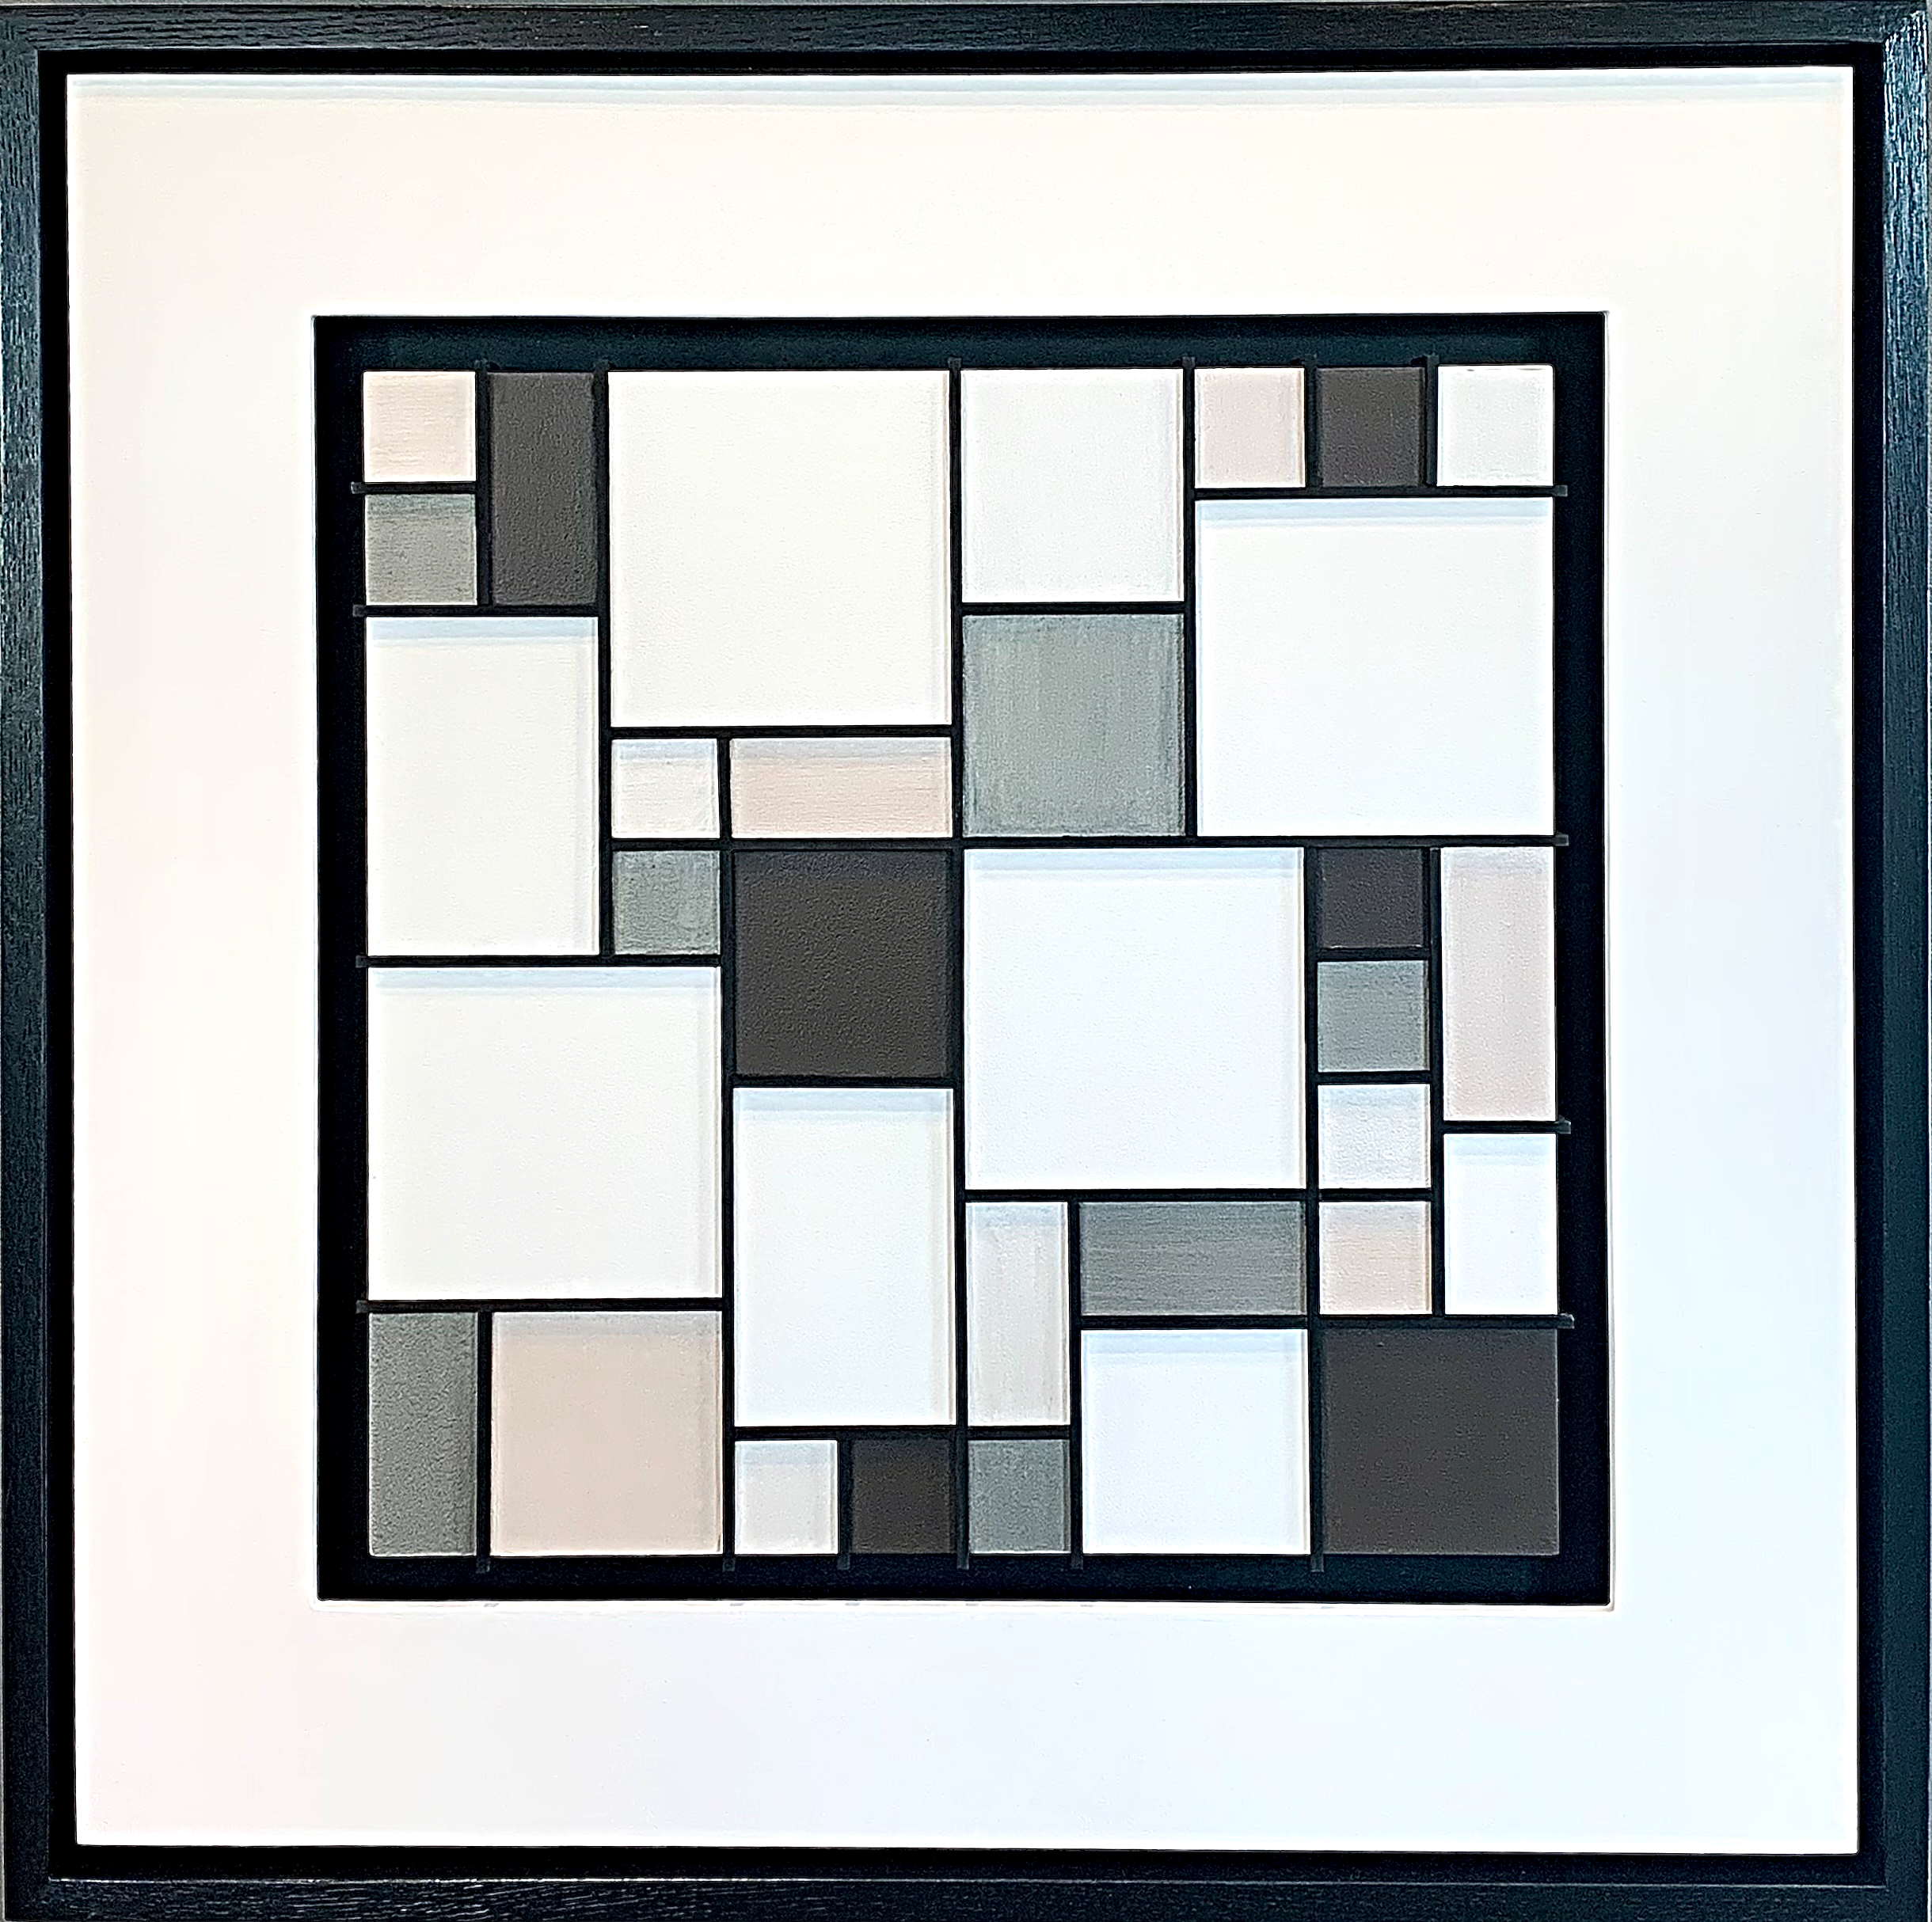 PM Shimmer, mixed media graphic mosaic by Richelle Osborne | Effusion Art Gallery + Cast Glass Studio, Invermere BC